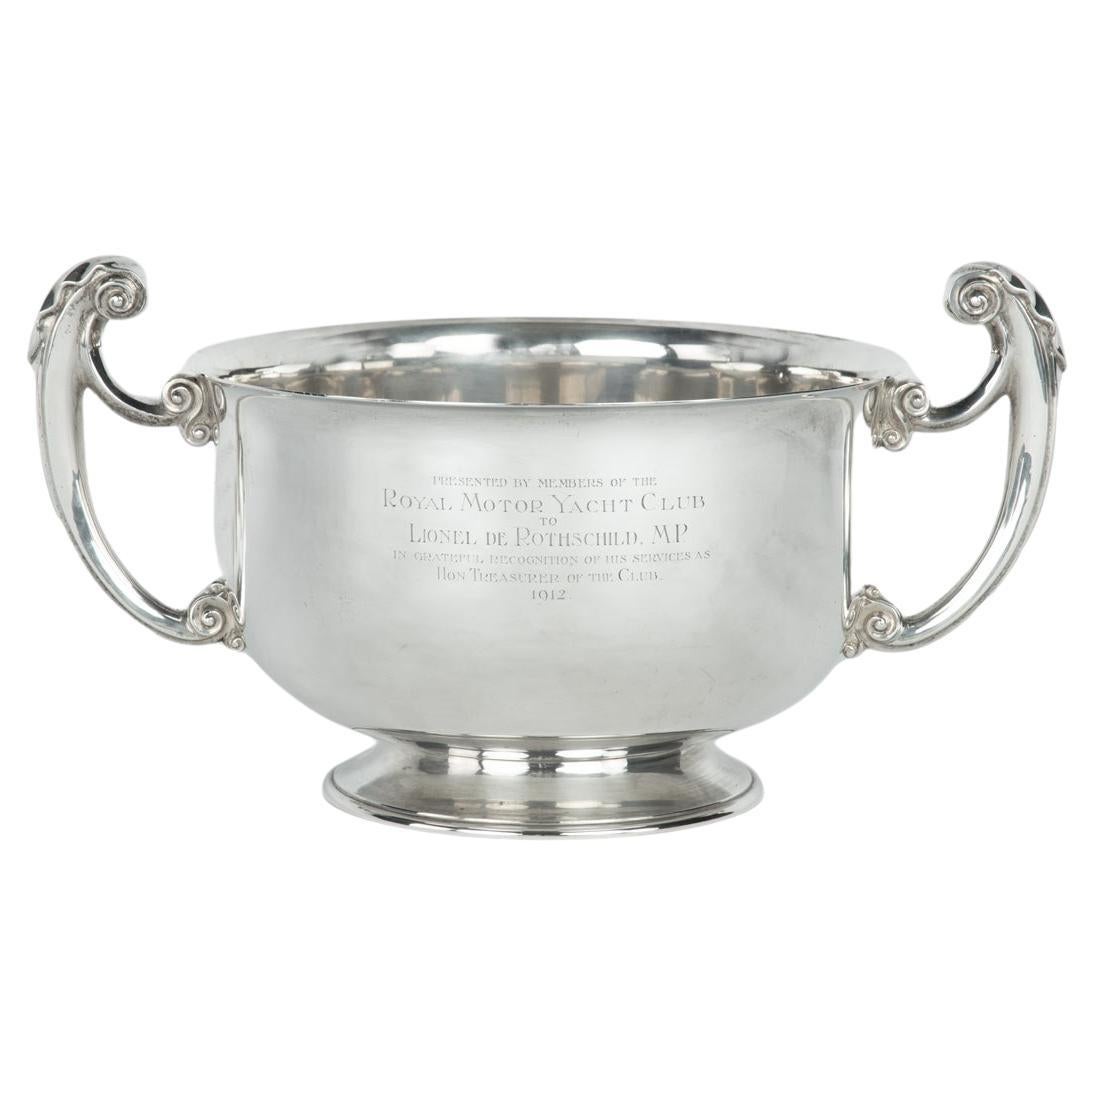 The ‘Entente Cordial’ silver champagne cooler for the British Motor Boat Club